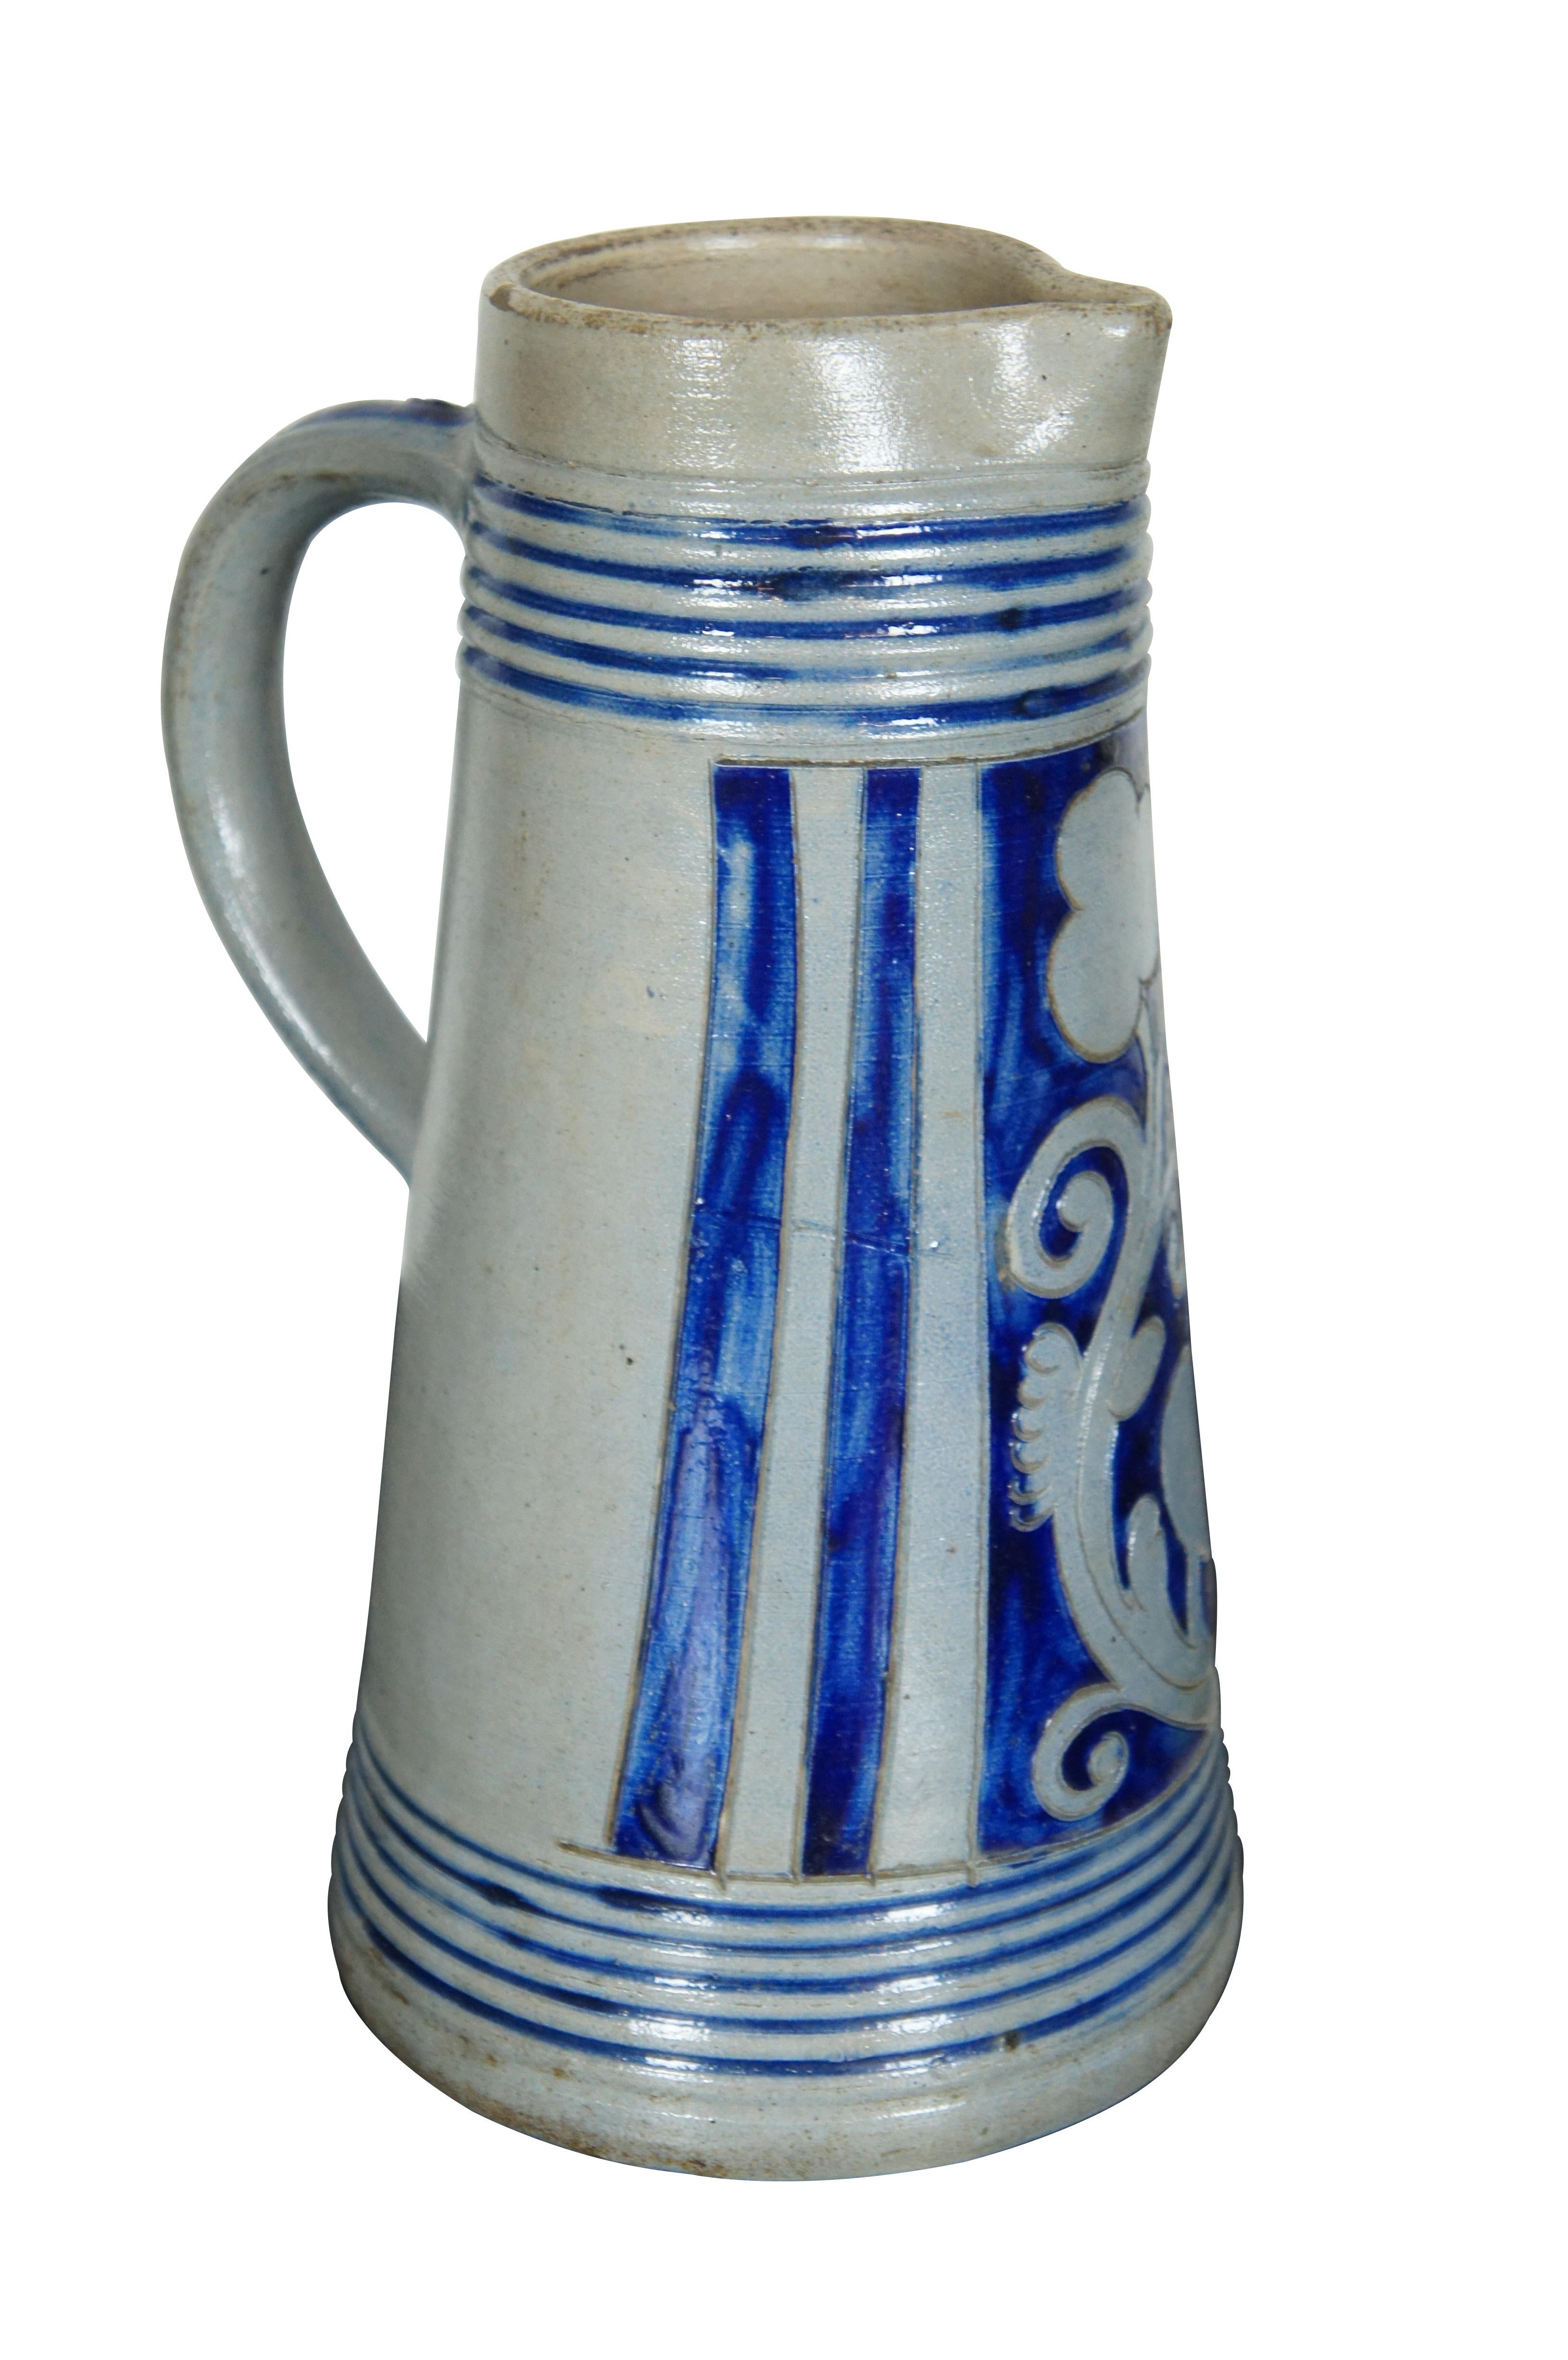 Antique German Westerwald stoneware pottery decanter jug or pitcher.  

Westerwald pottery, or Westerwald stoneware, is a distinctive type of salt glazed grey pottery from the Höhr-Grenzhausen and Ransbach-Baumbach area of Westerwaldkreis in